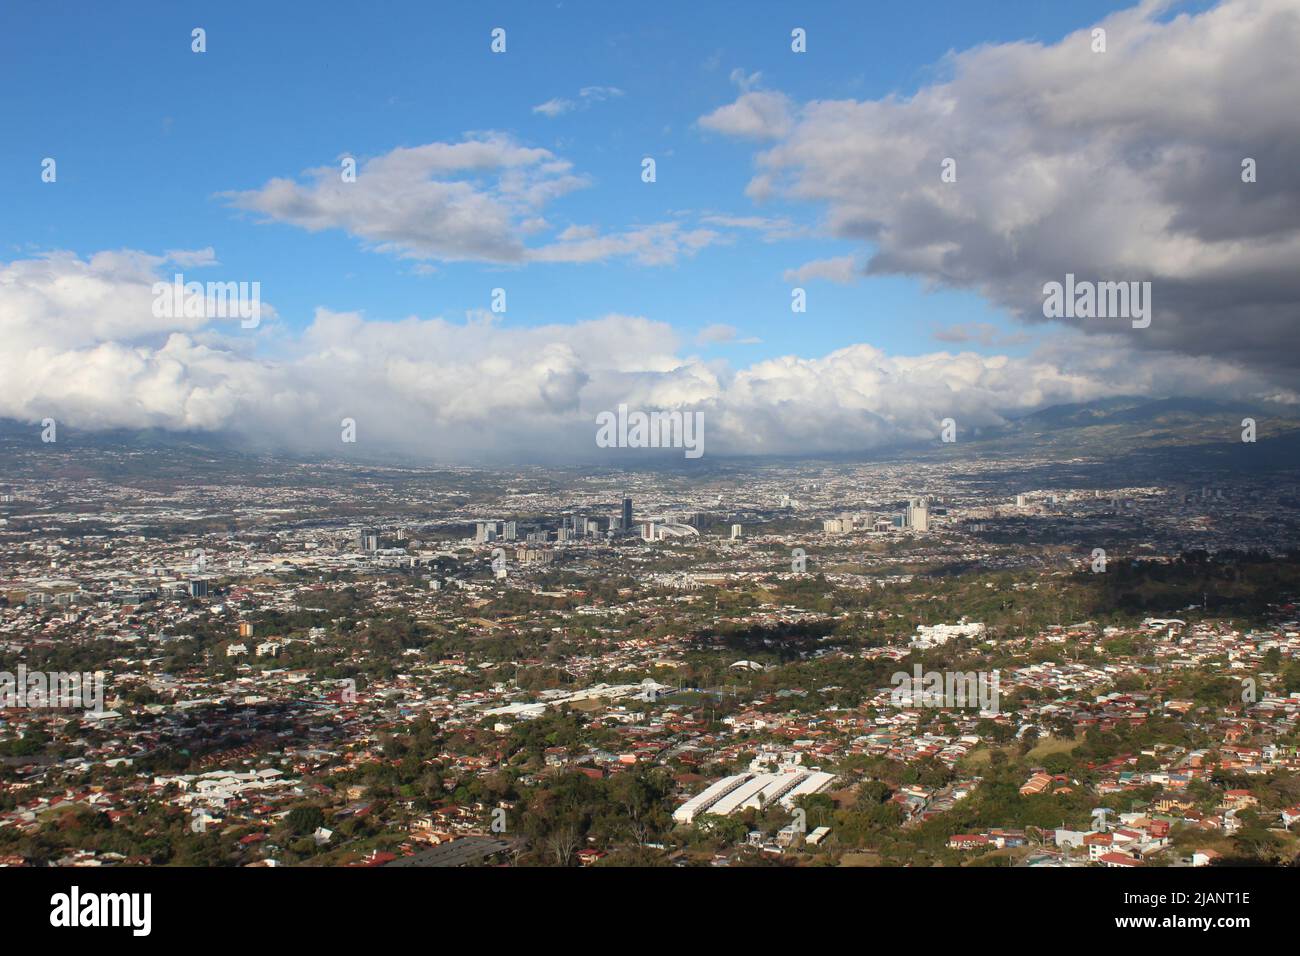 View of Central Valley of Costa Rica from Escazu Stock Photo